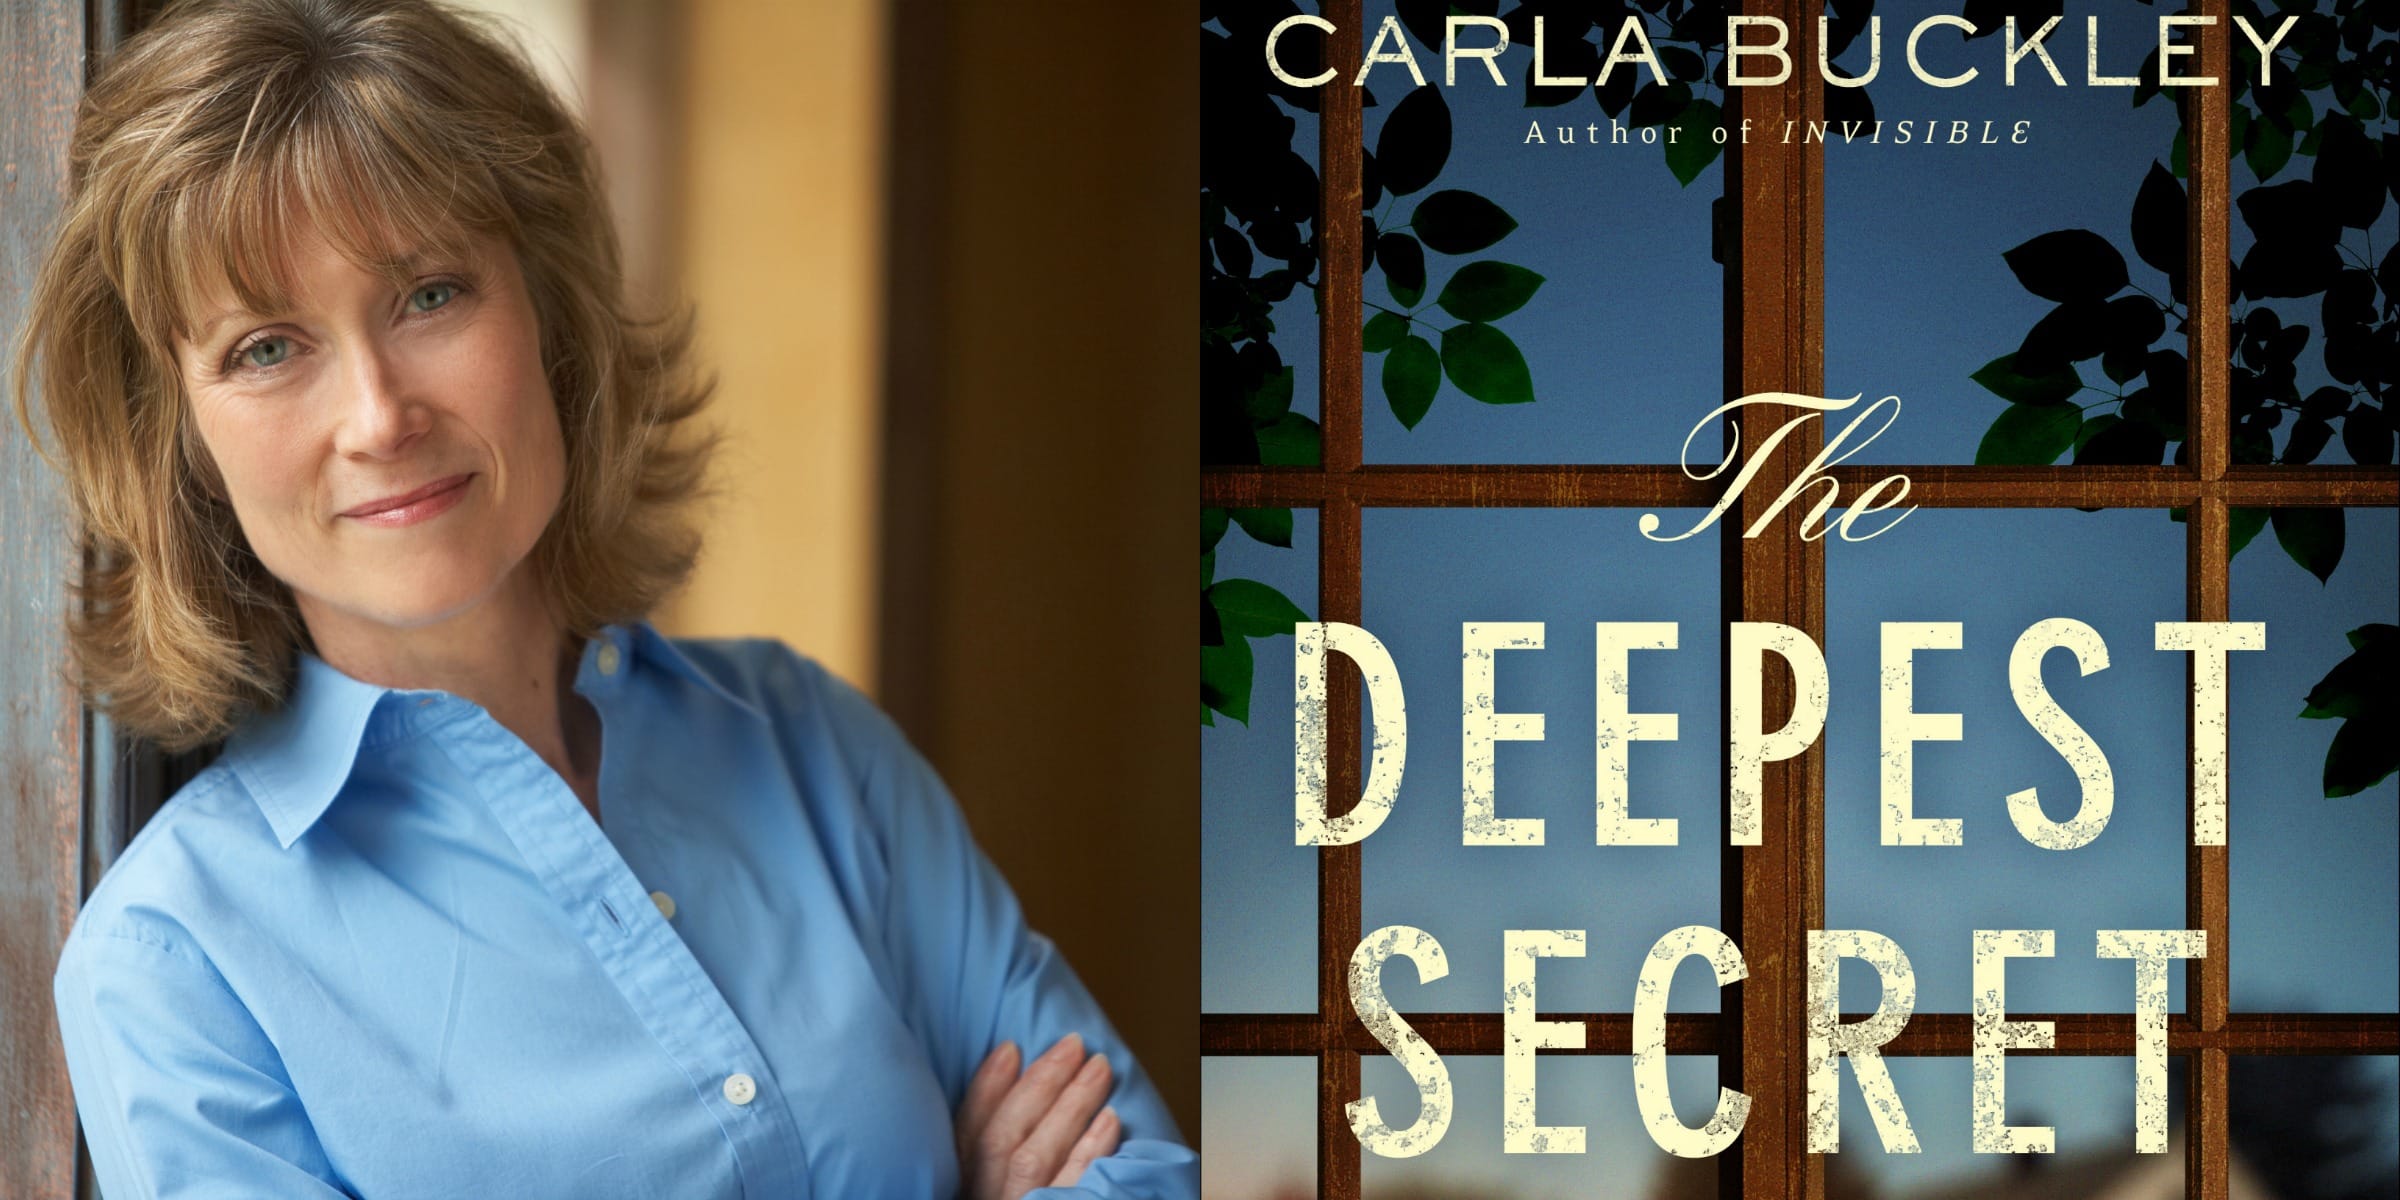 Sundays With Writers: The Deepest Secret by Carla Buckley